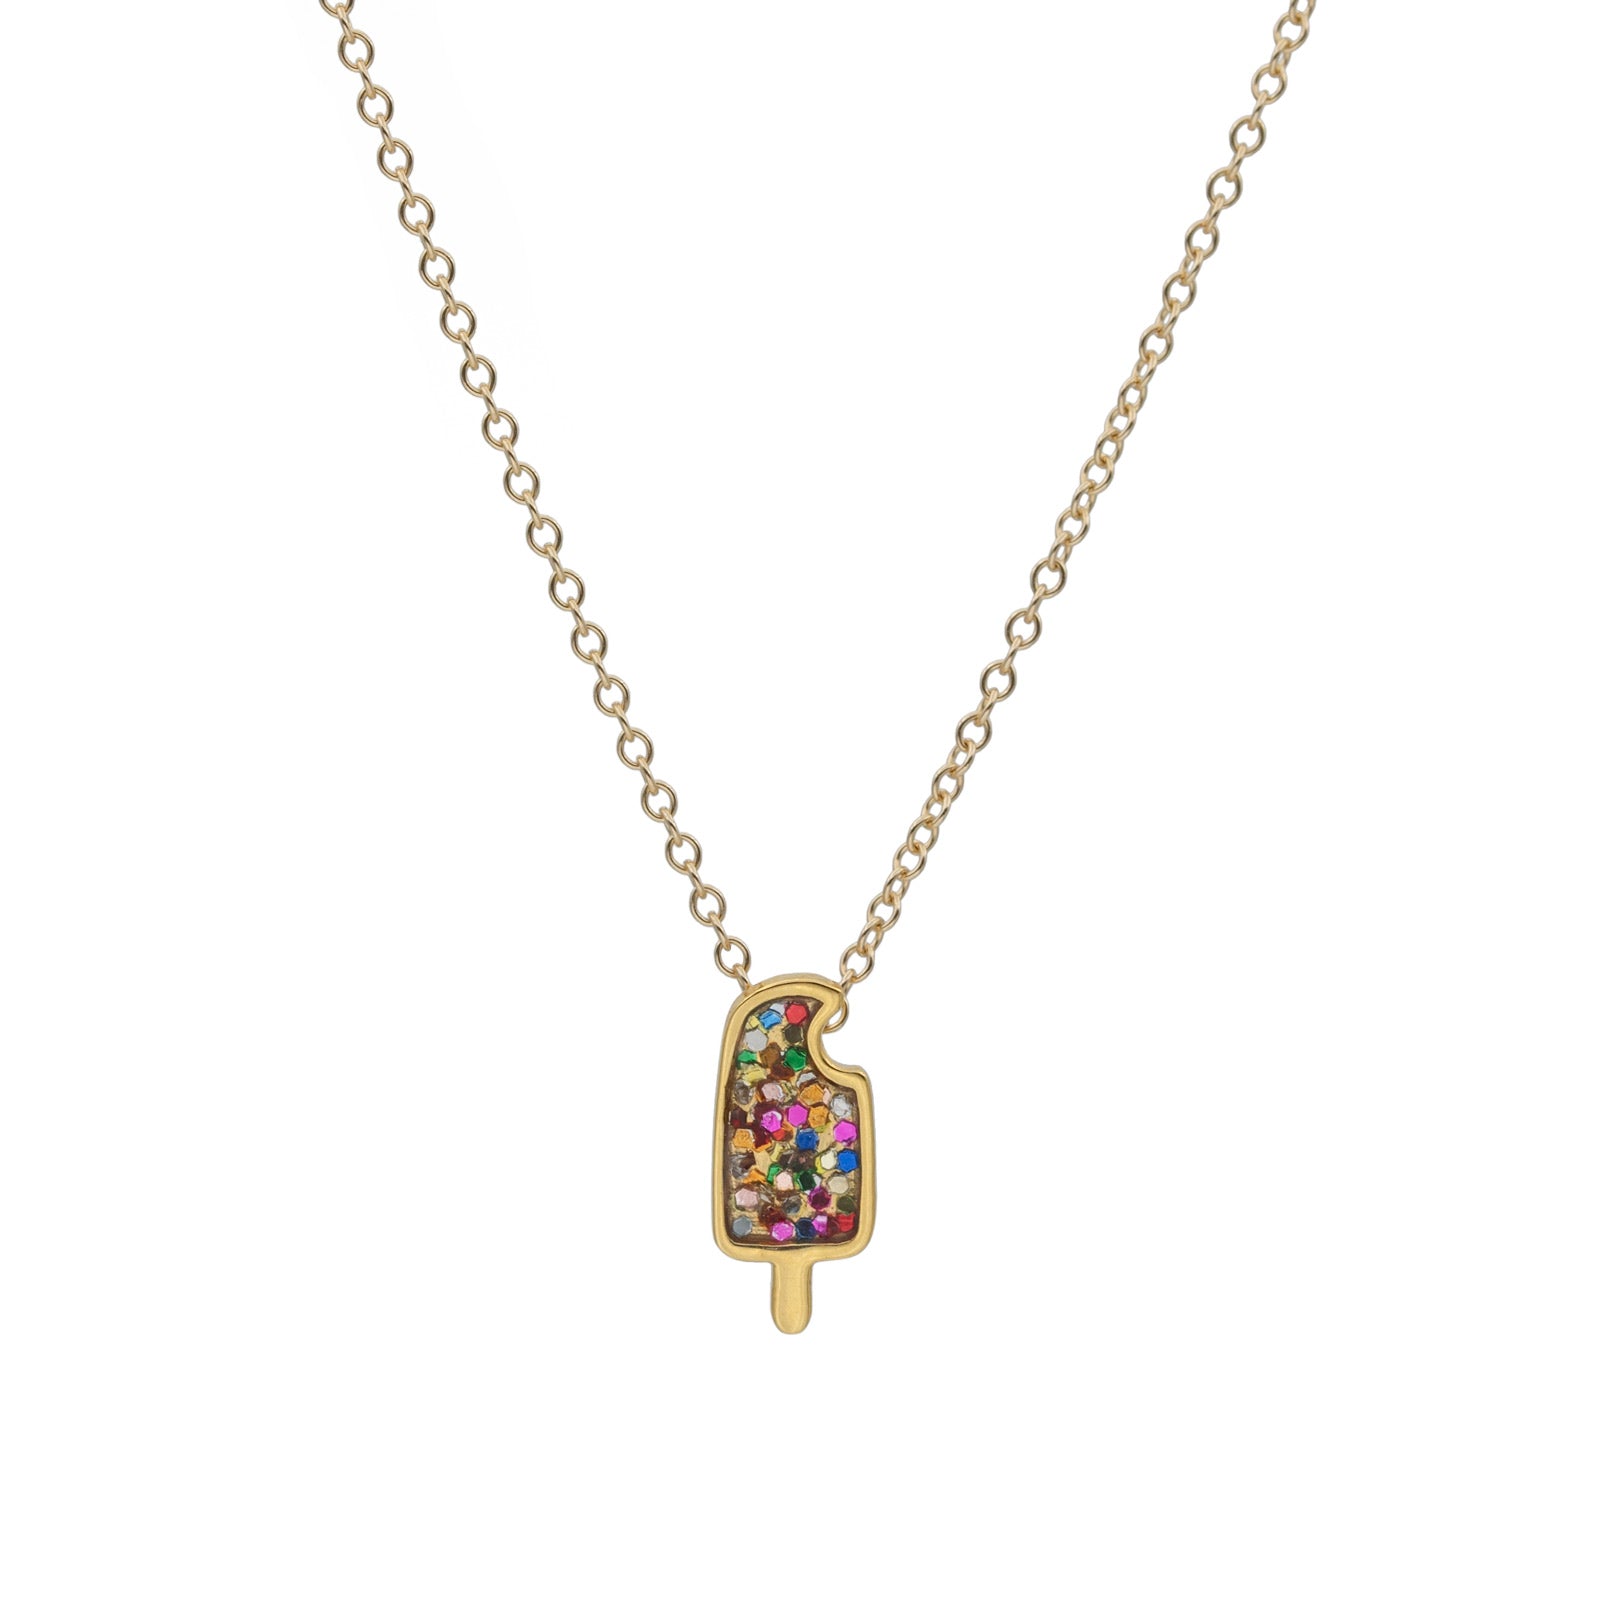 popsicle necklace in 14k gold filled with multiglitter